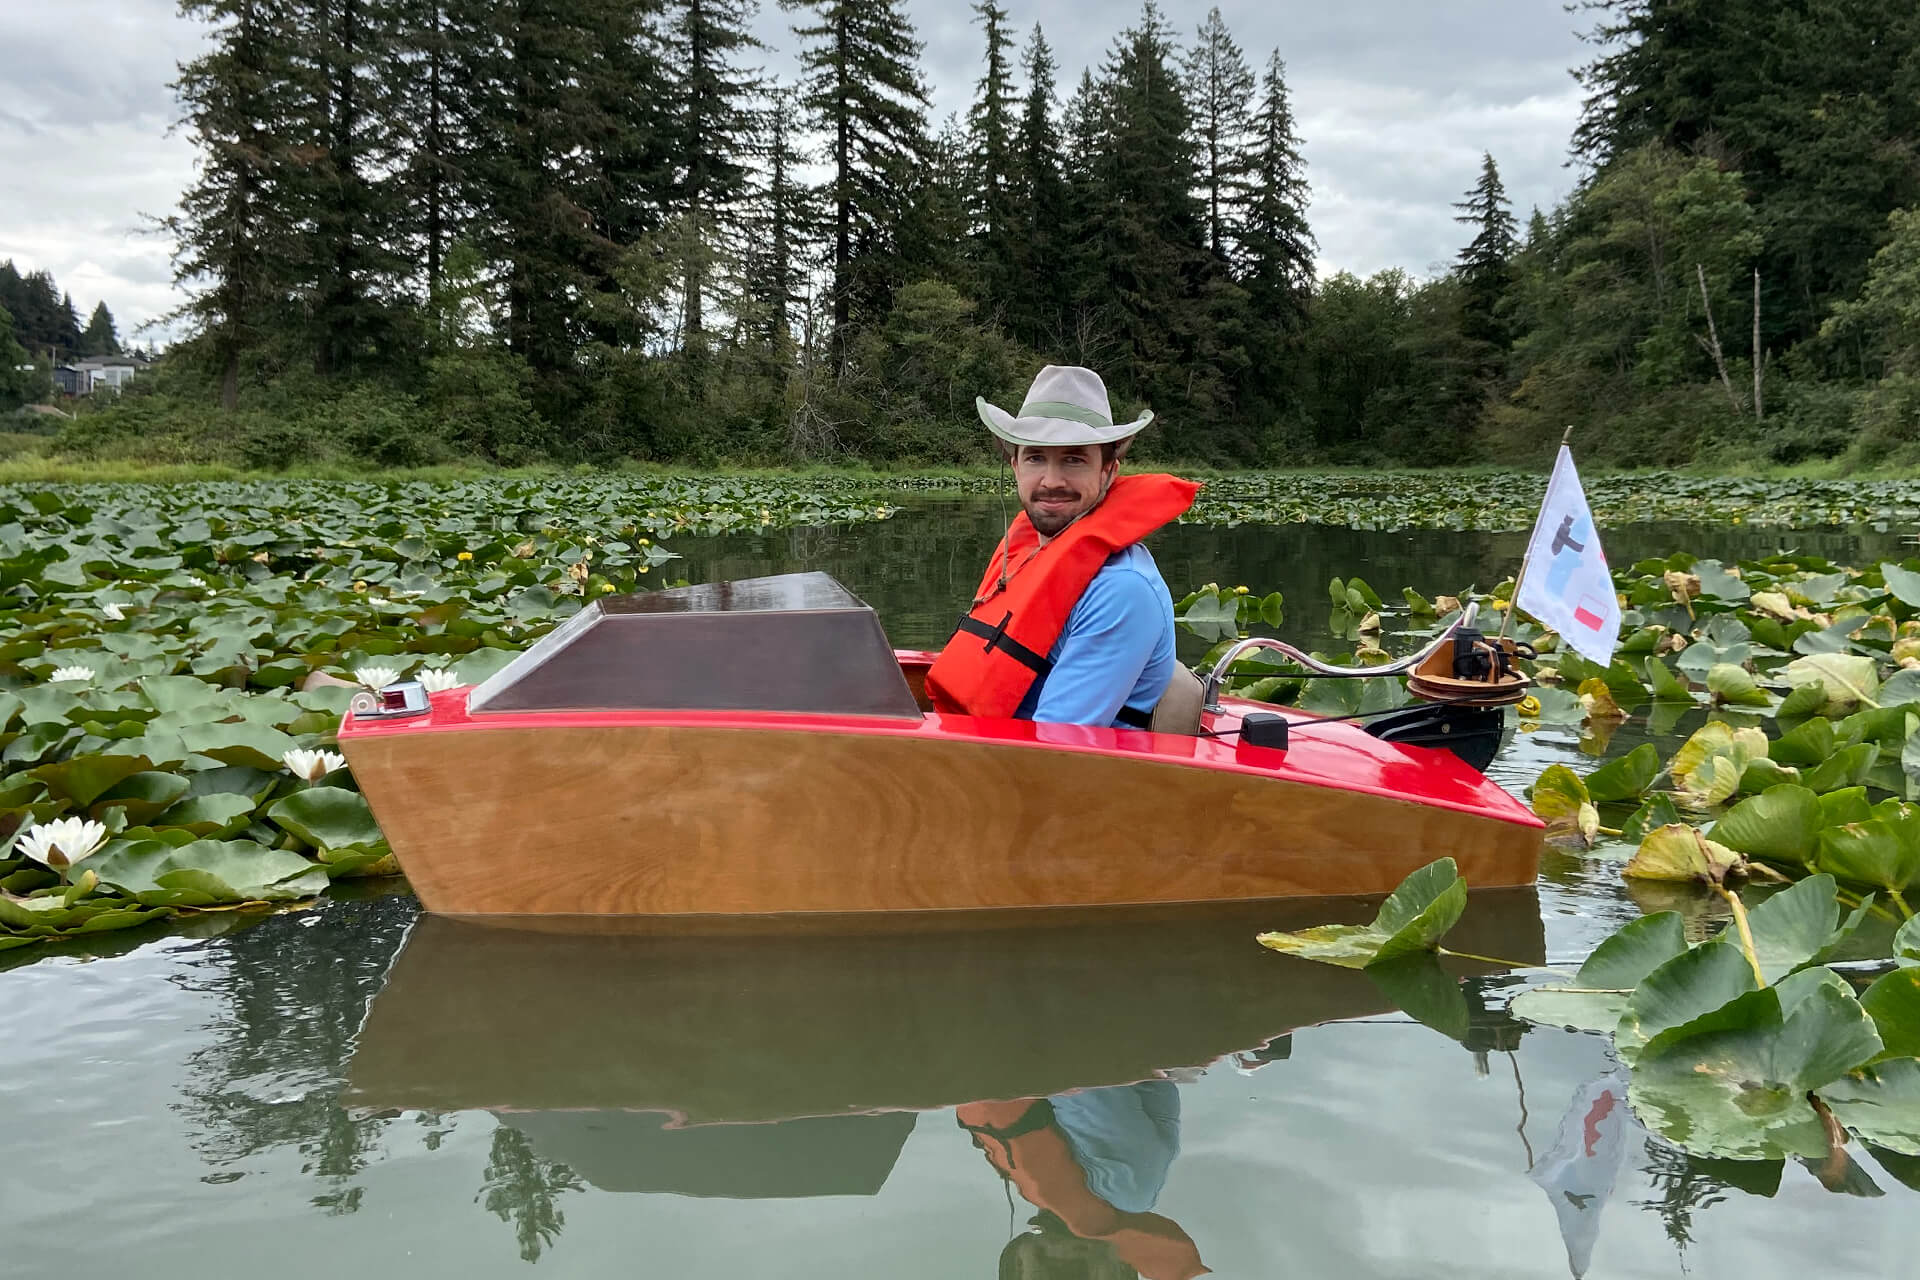 The mini boat floating in Lacamas lake, surrounded by lilly pads